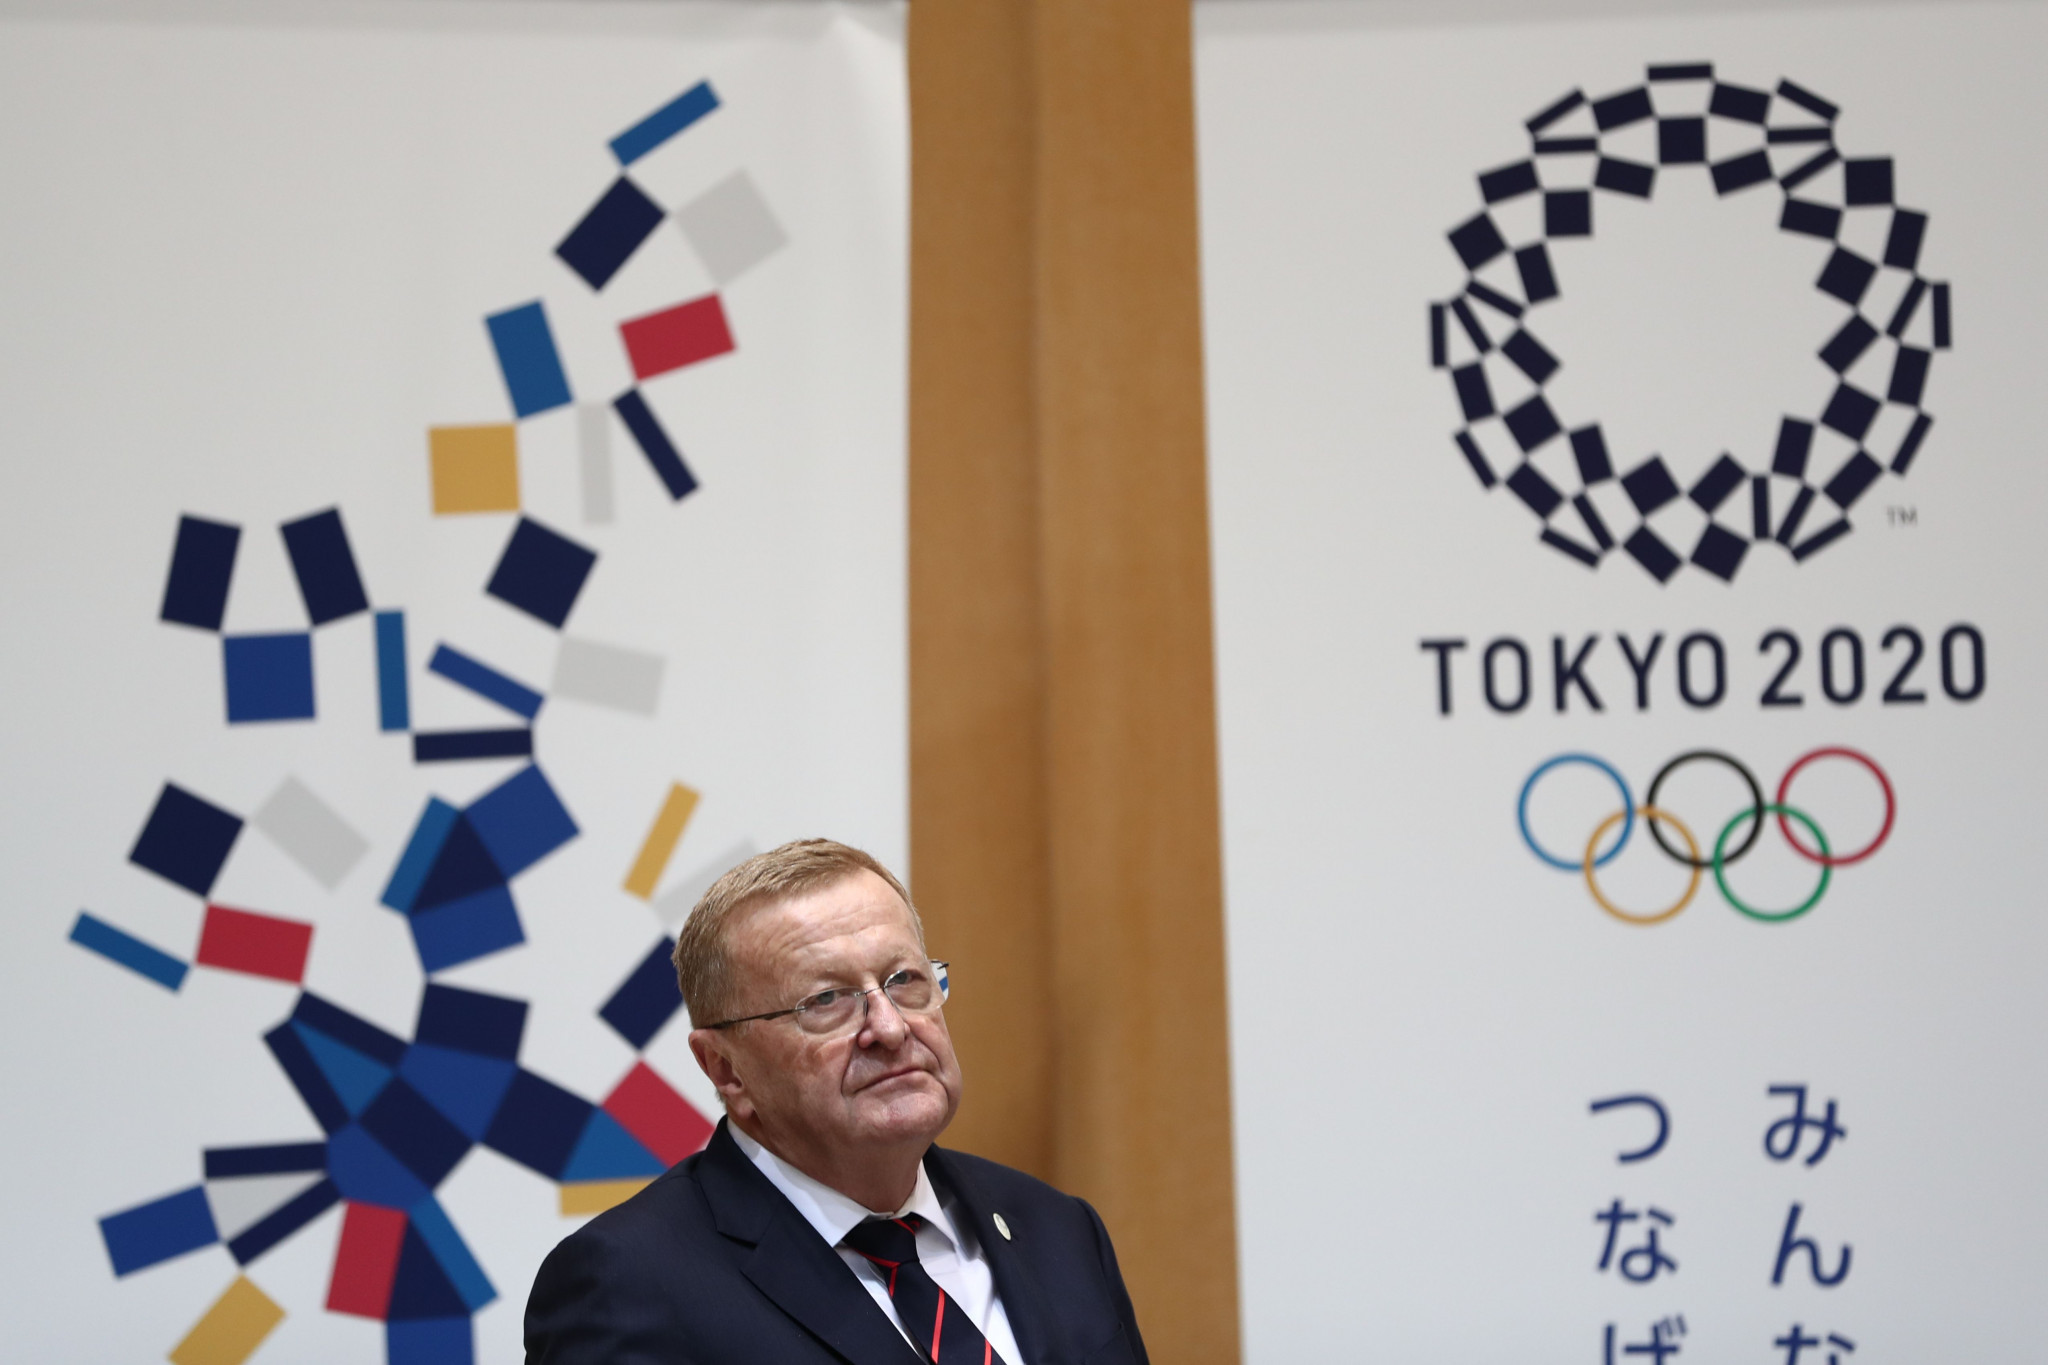 John Coates has said Tokyo 2020 will take place next year with or without COVID-19 ©Getty Images